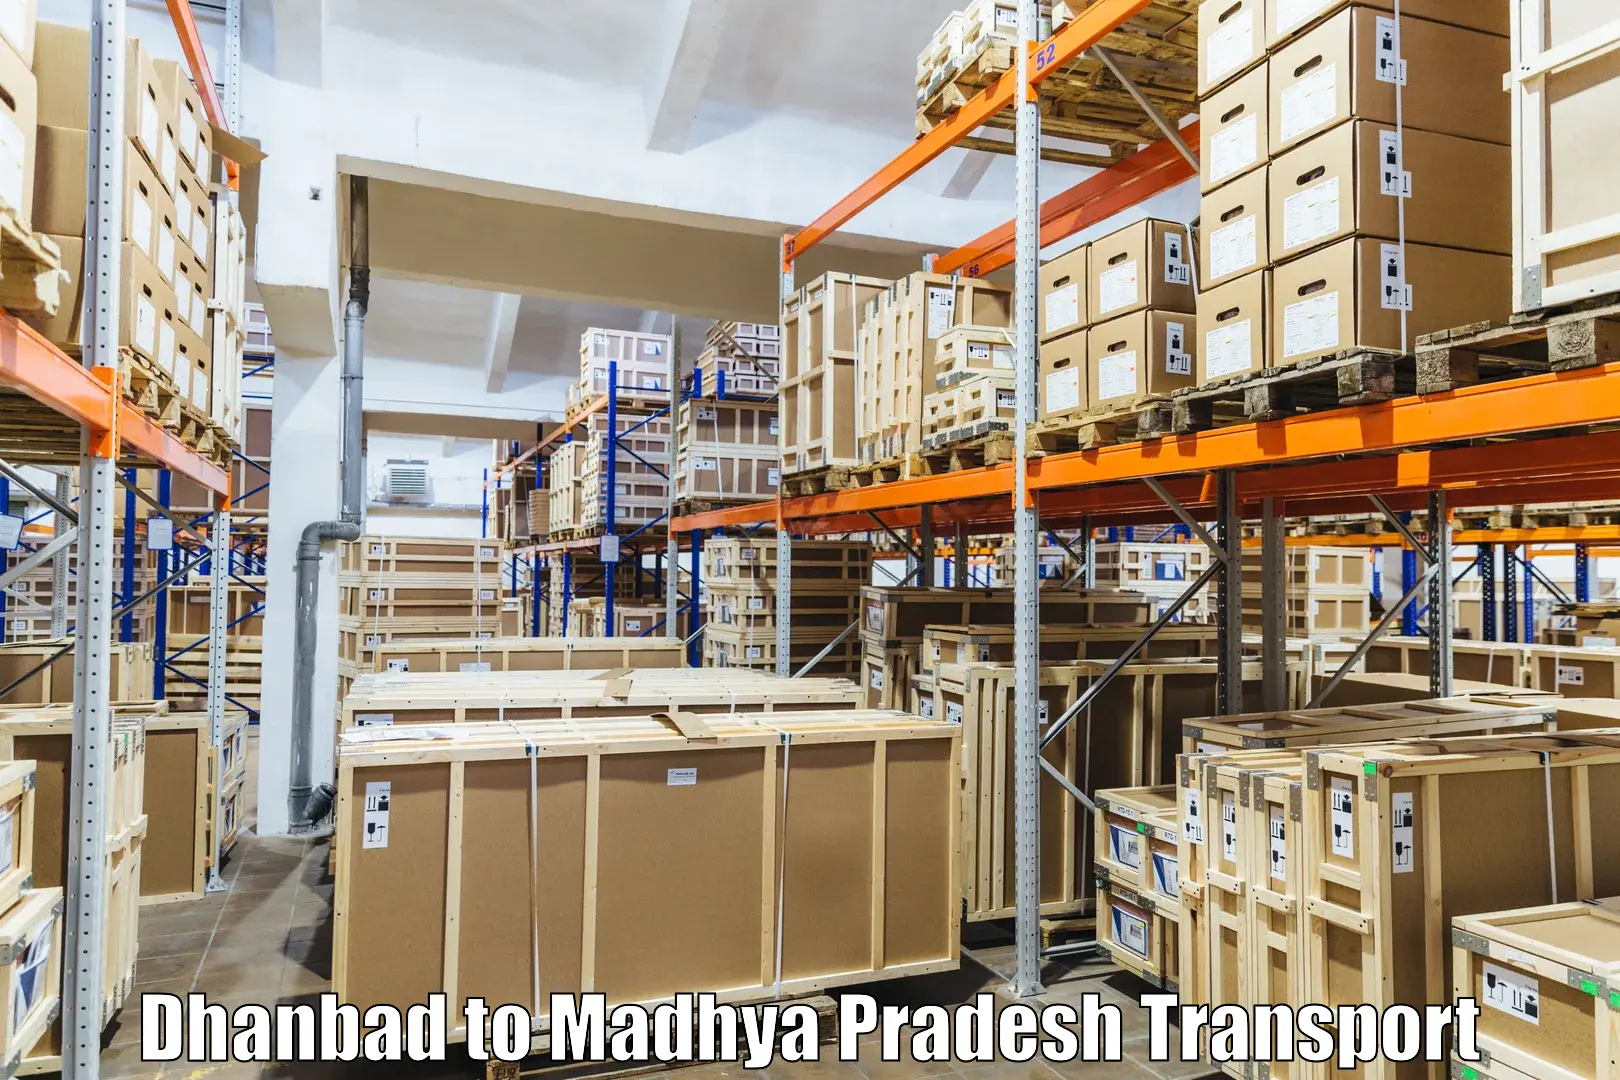 Express transport services in Dhanbad to Mandideep